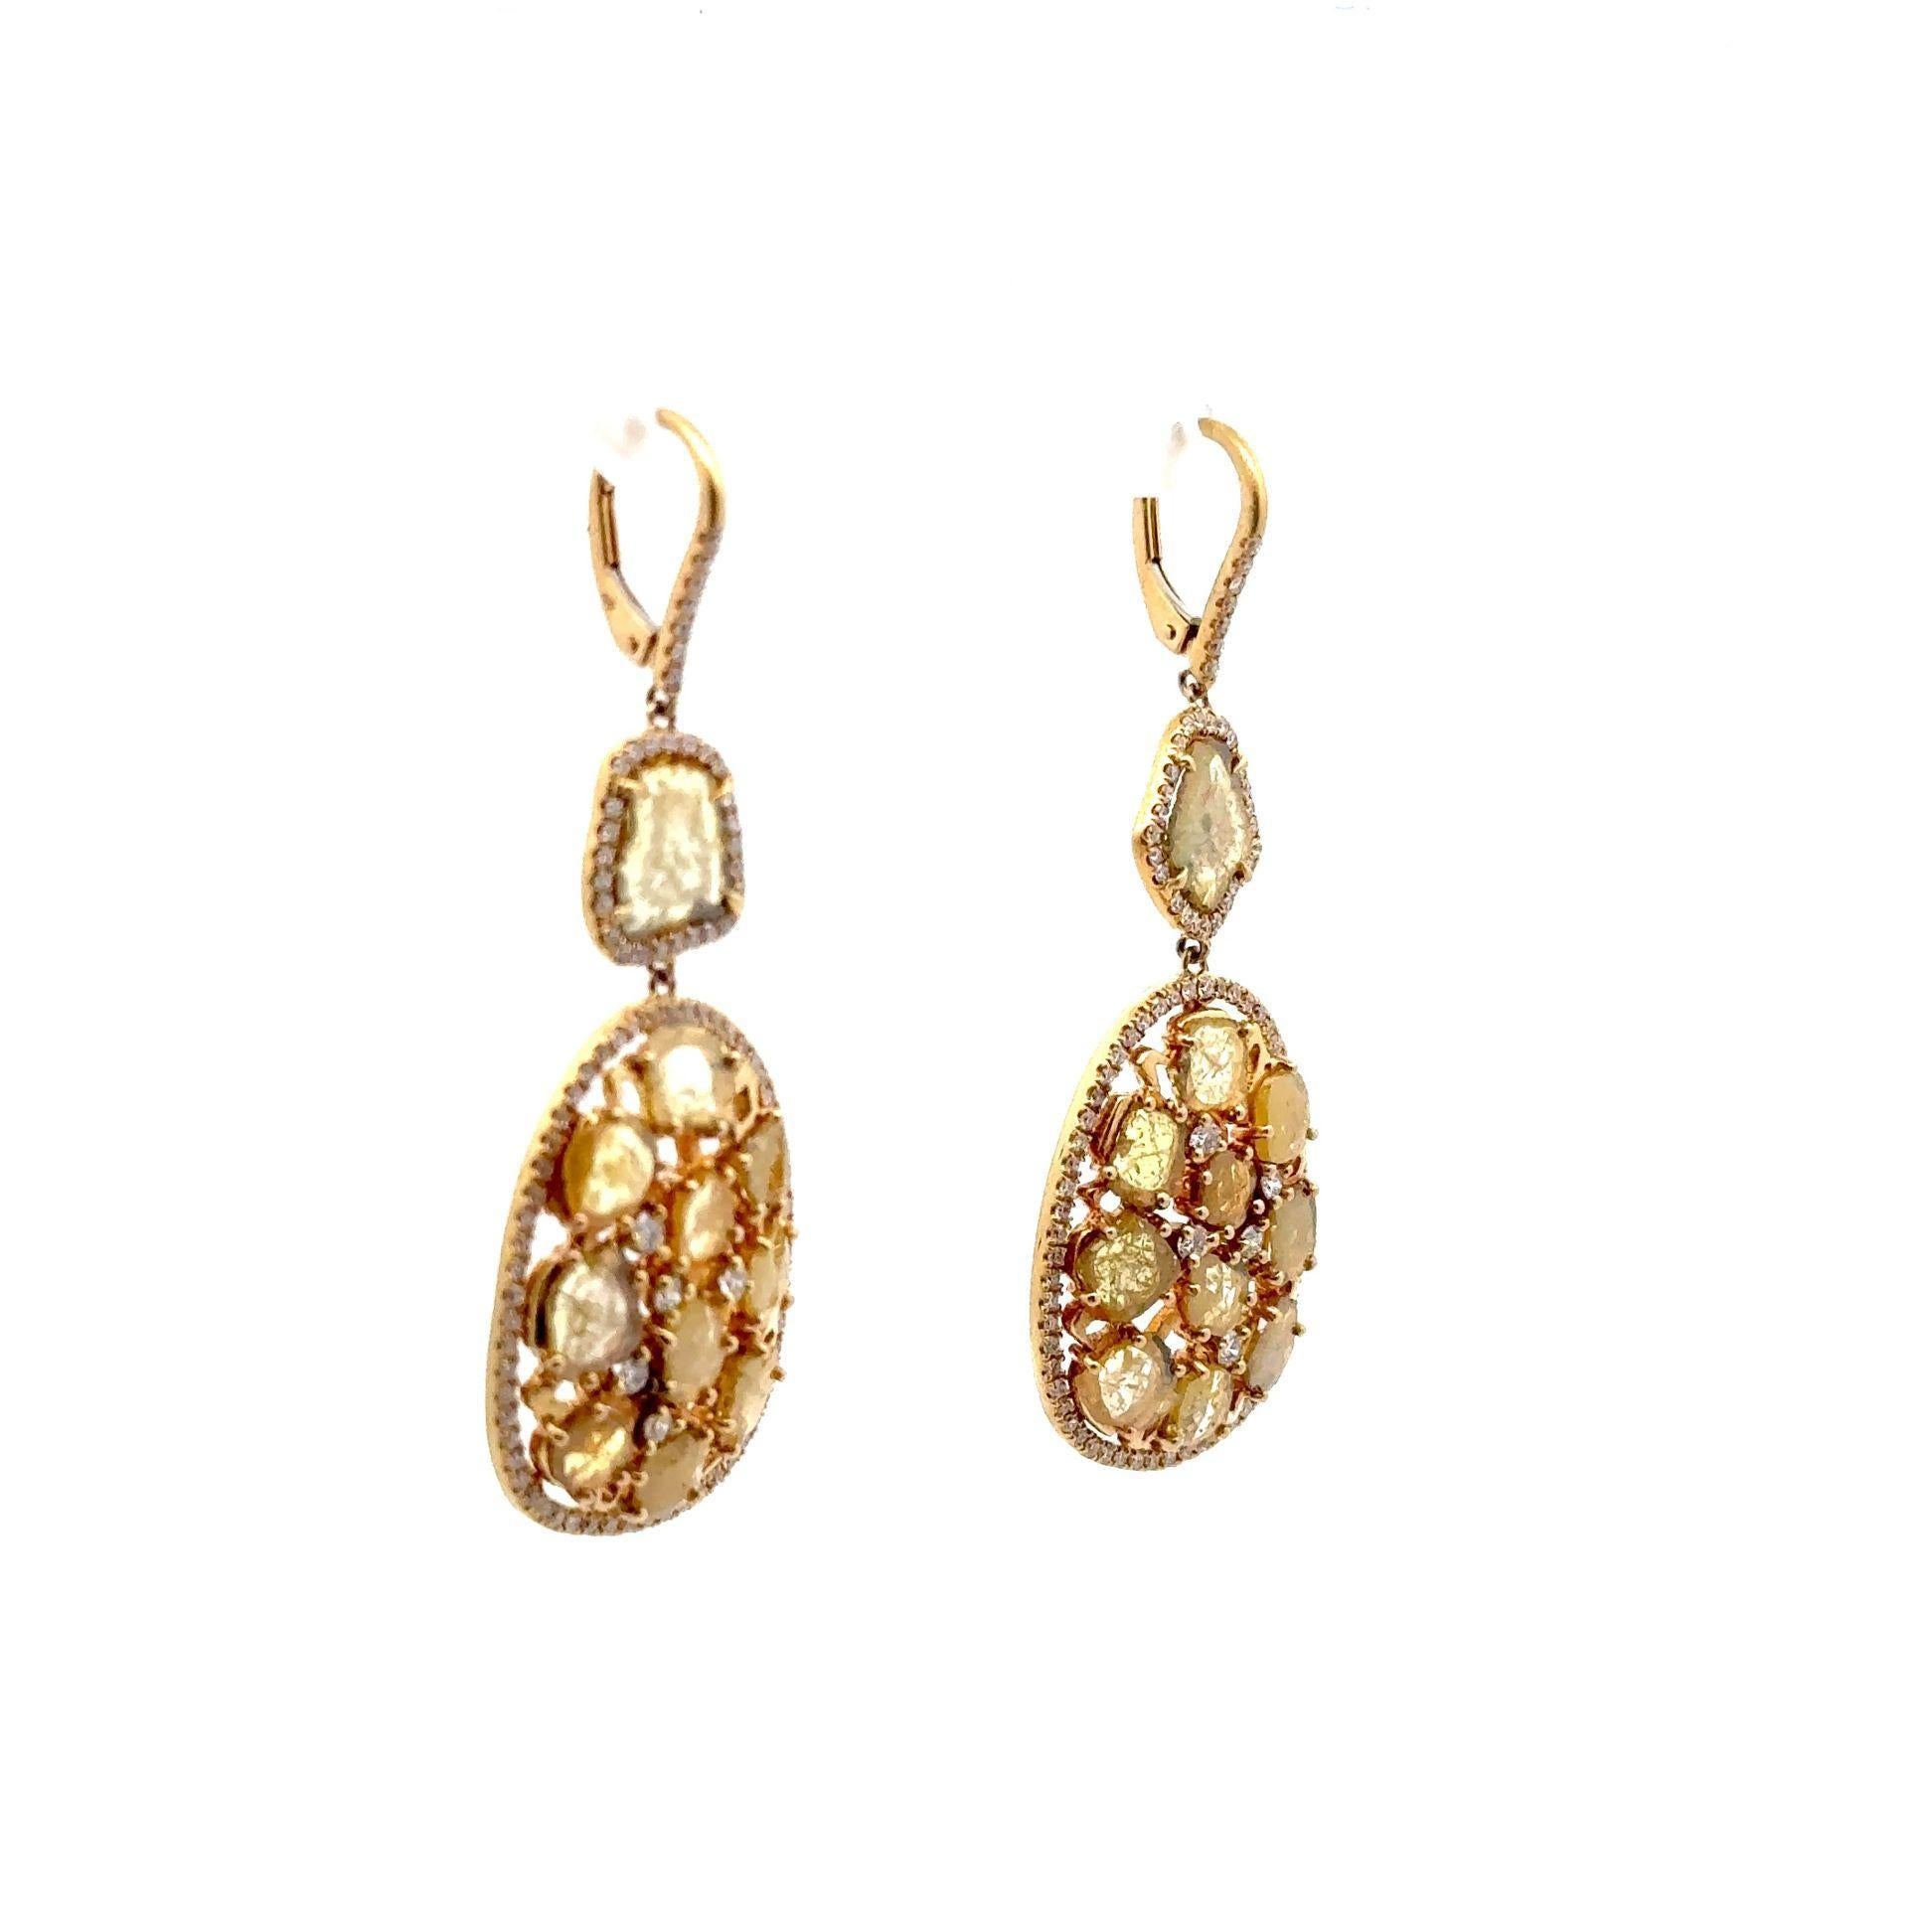 A magnificent crafted pair of drop earrings, featuring irregular shapes of yellow diamond slices. Each diamond slice reflects the warm hues of the 18kt yellow gold, adding a touch of luxury and sophistication to your ensemble. The dainty dangle